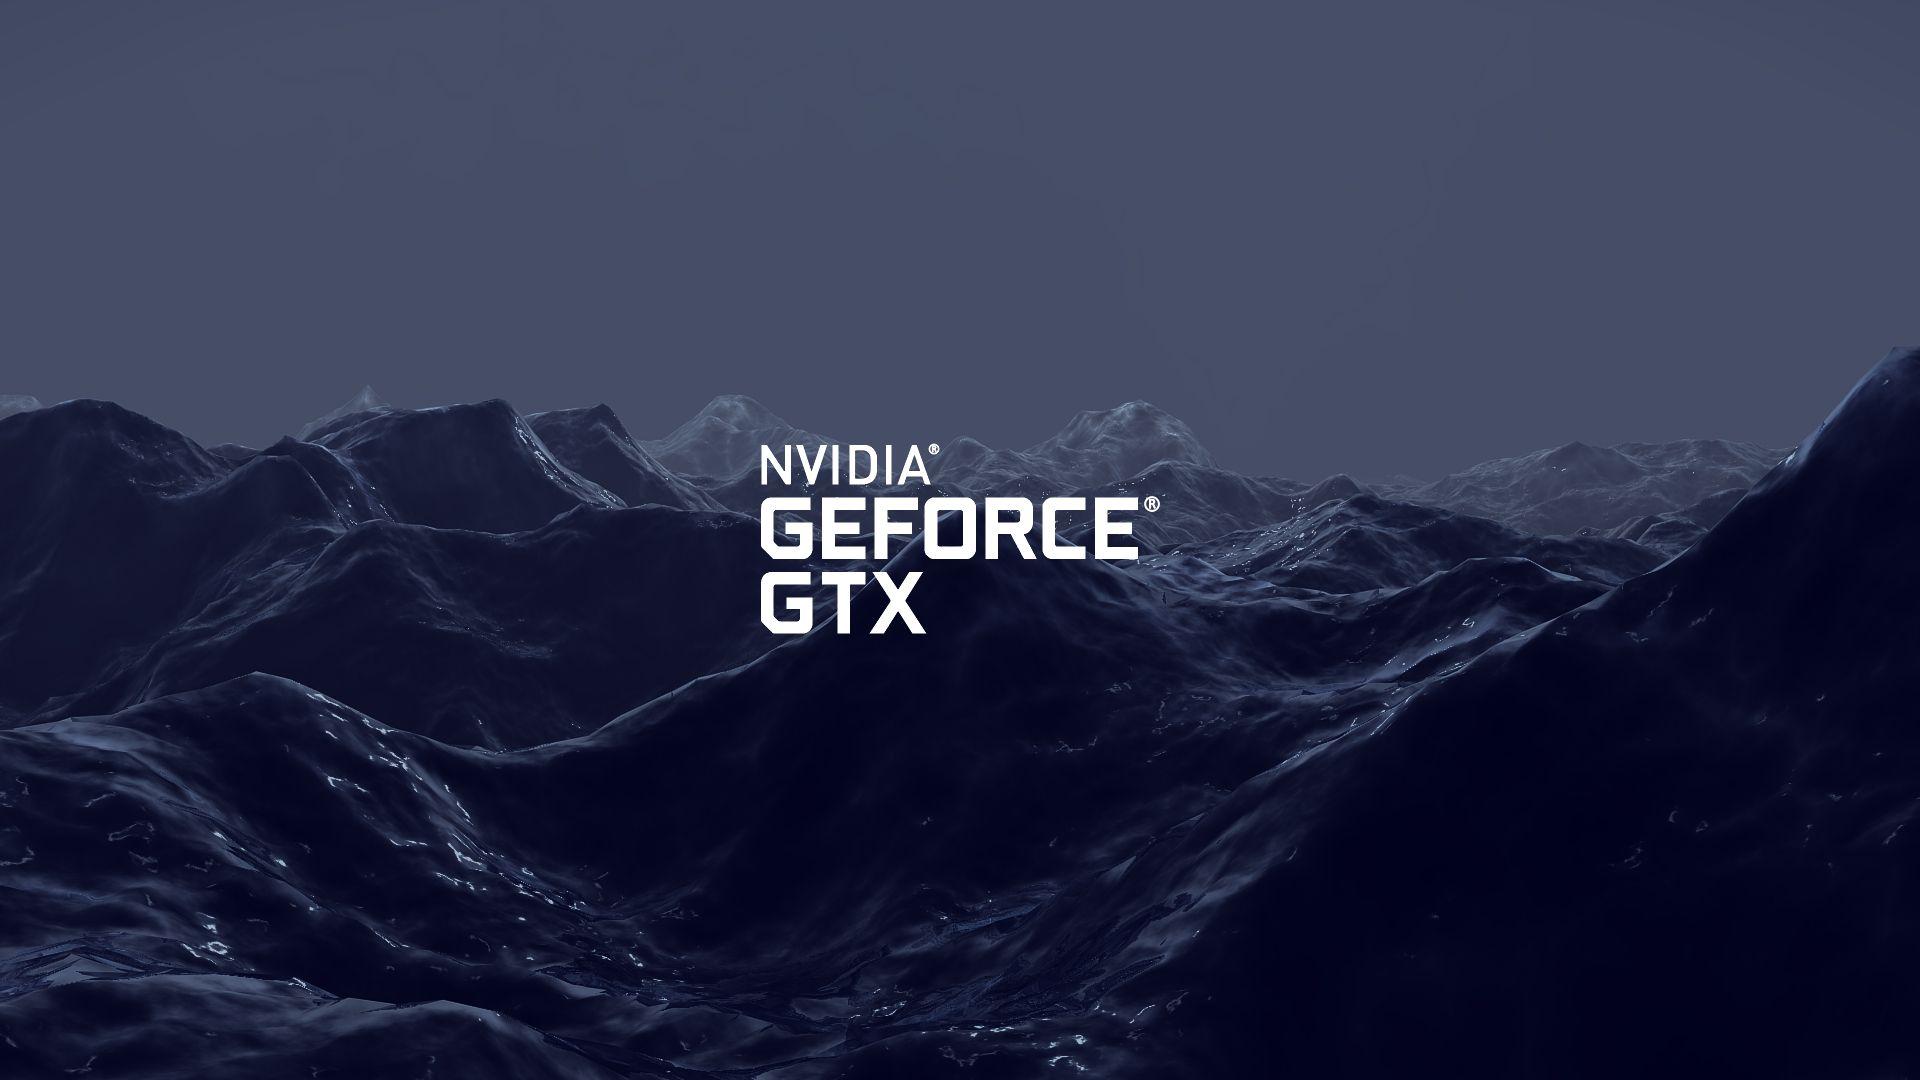 Made wallpaper for NVIDIA and AMD users!